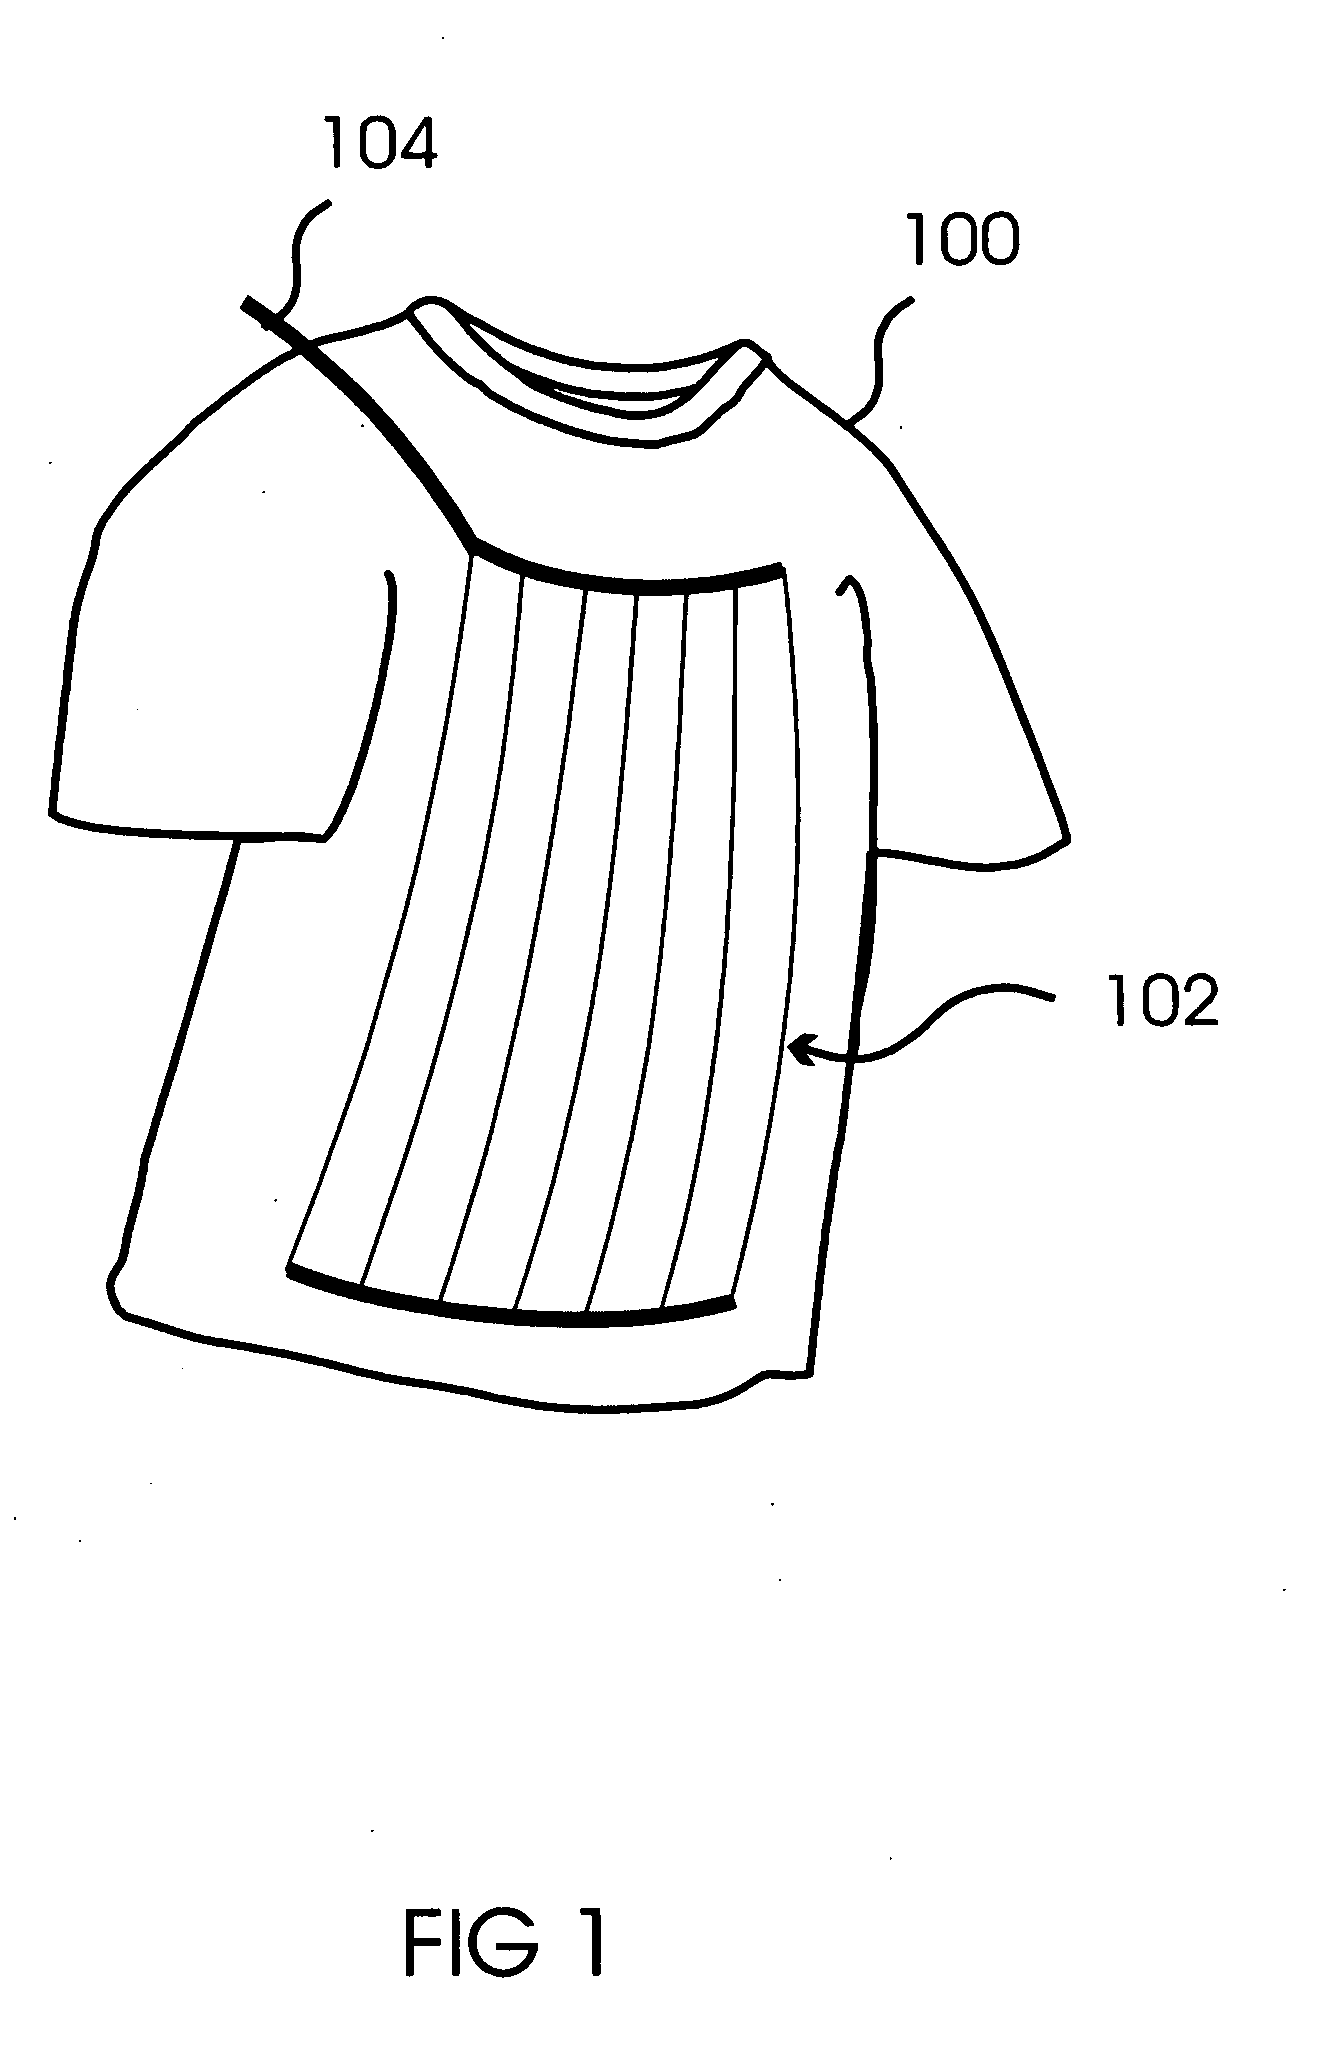 Garment Having a Vascular System for Facilitating Evaporative Cooling of an Individual